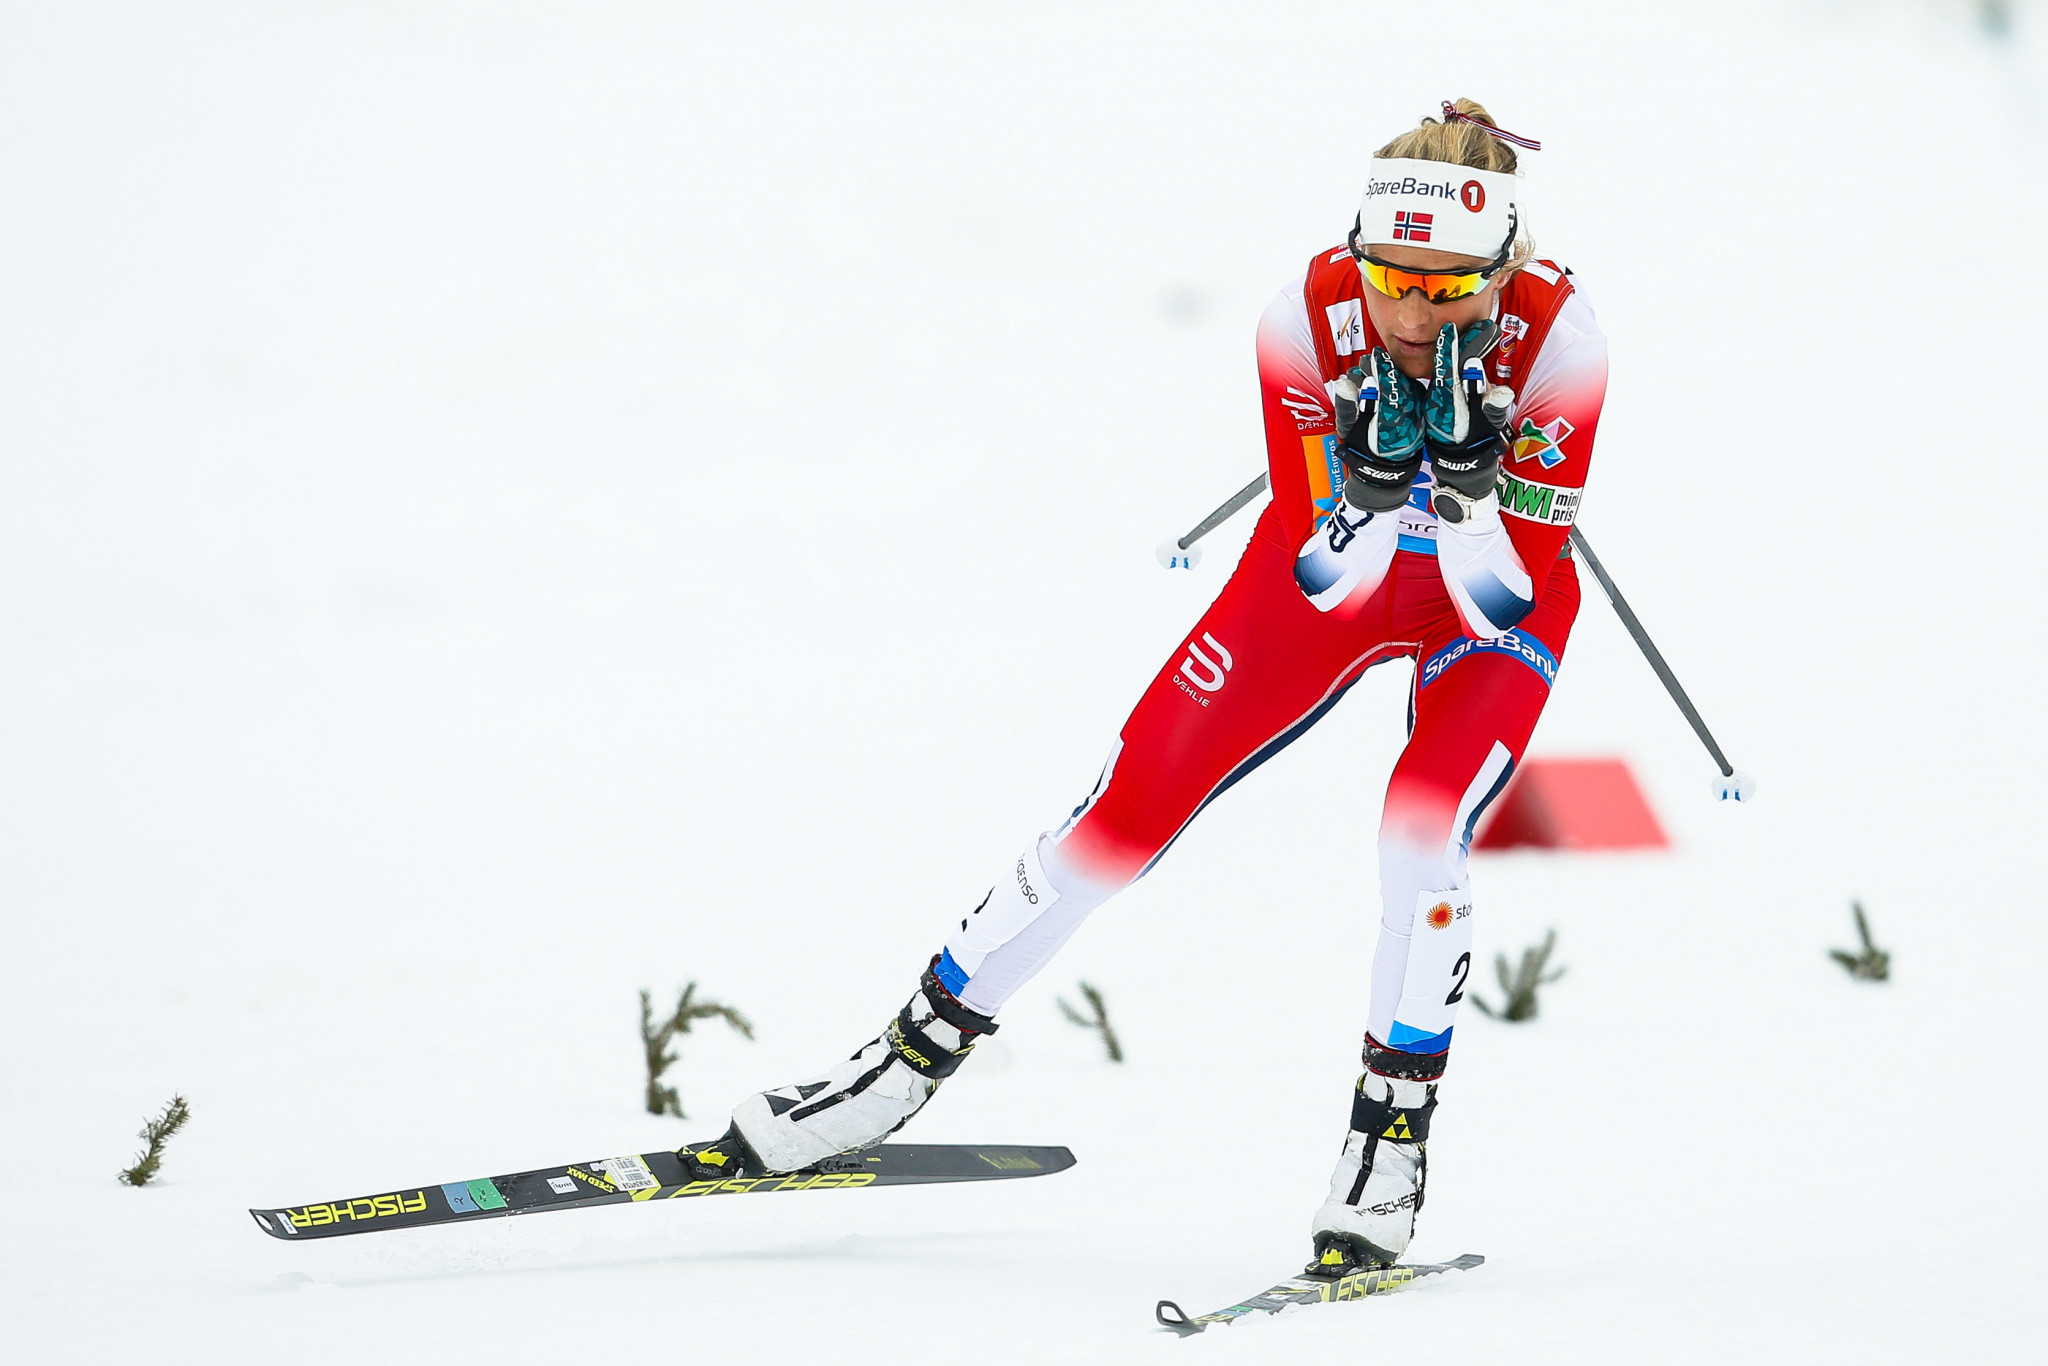 Johaug completes hat-trick with third gold medal at FIS Nordic World Ski Championships